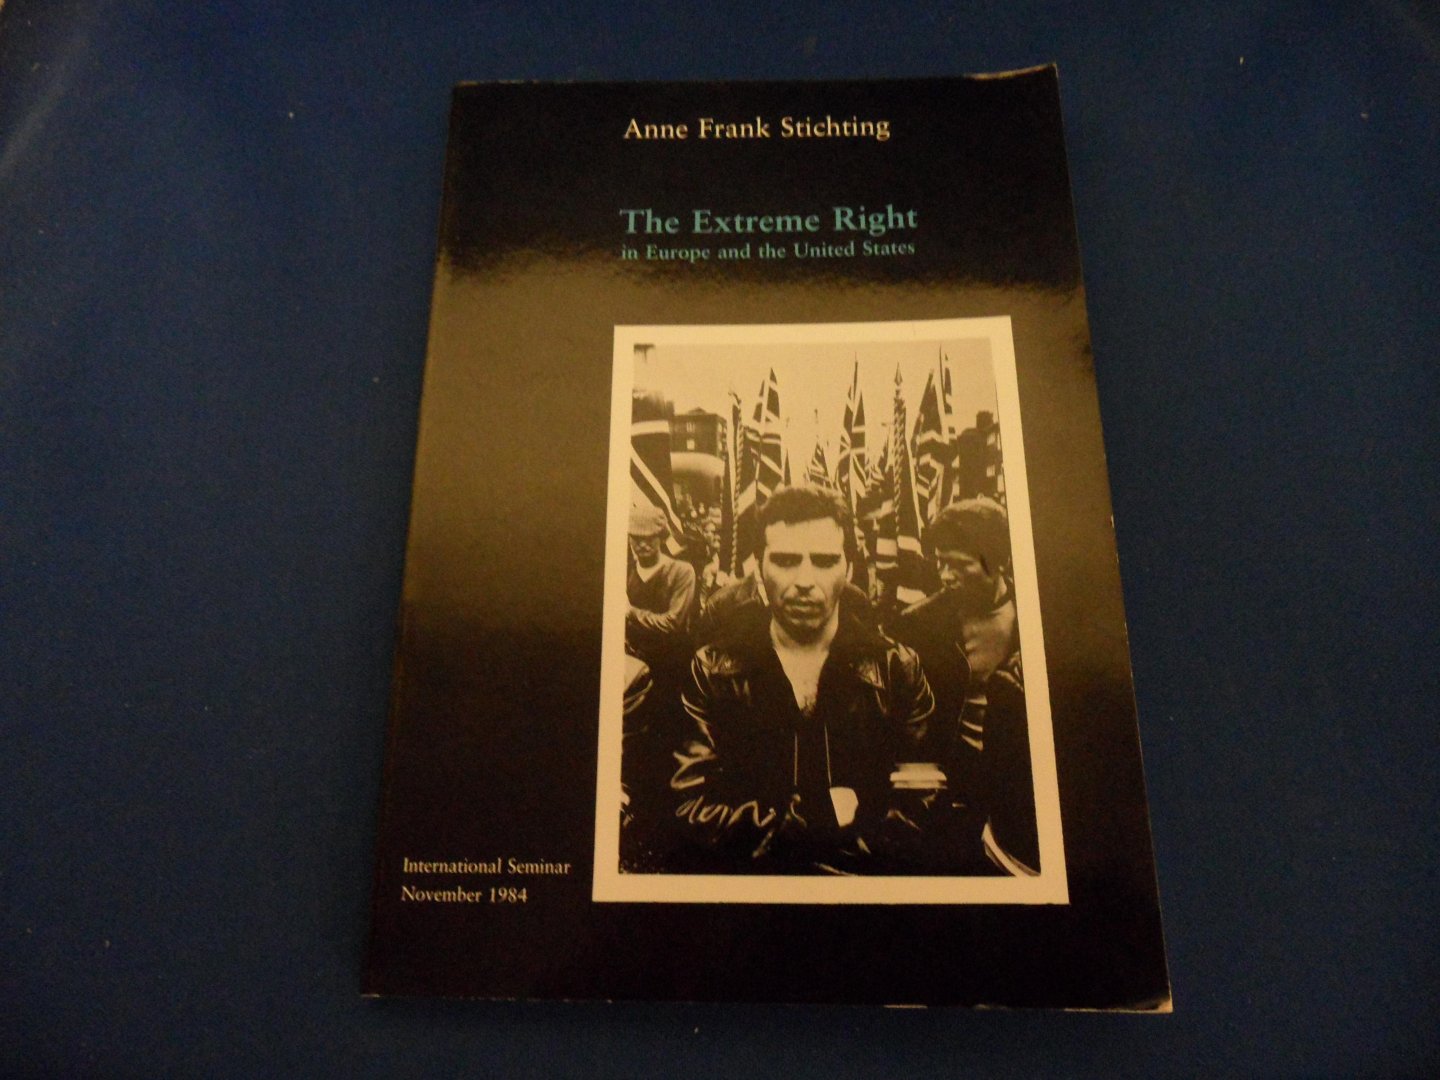 Anne Frank Stichting - The Extreme Right in Europe and the United States